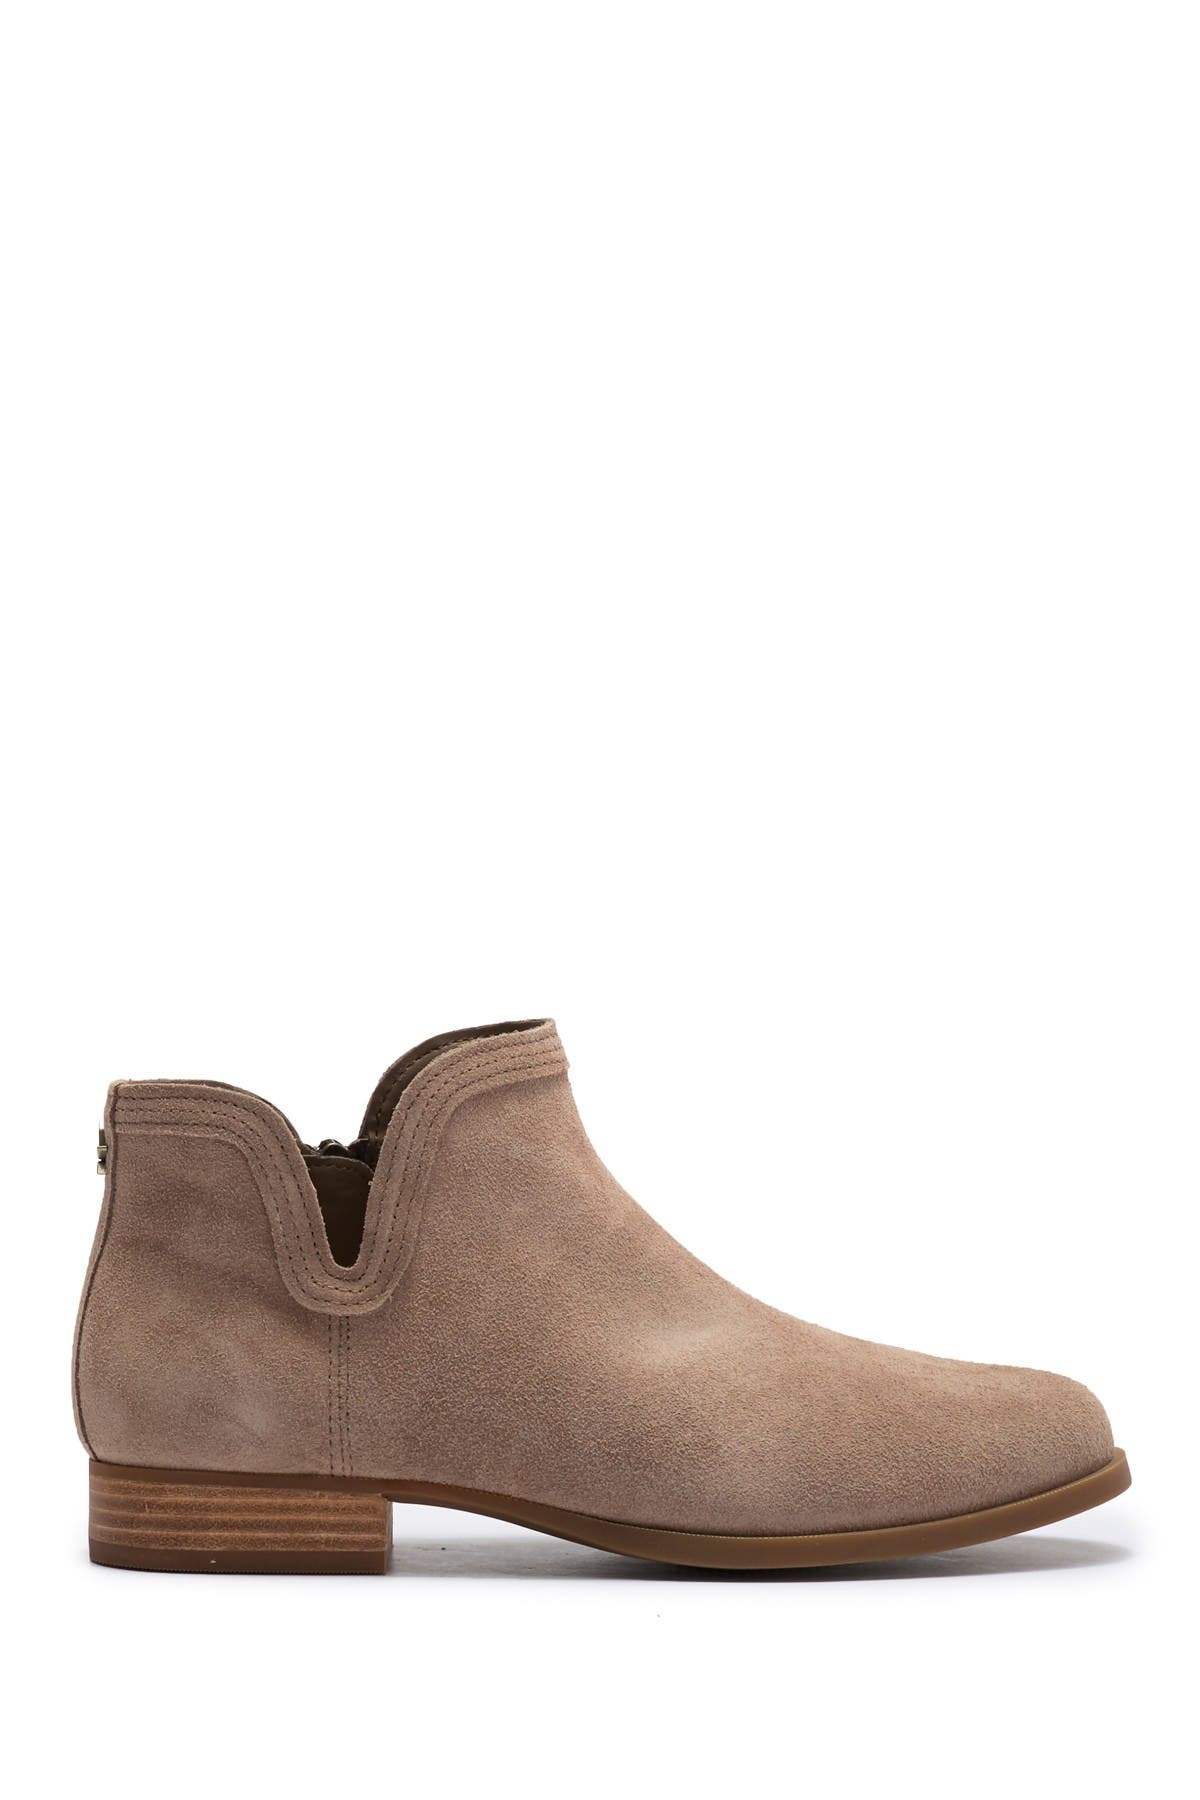 cheyanna suede ankle bootie